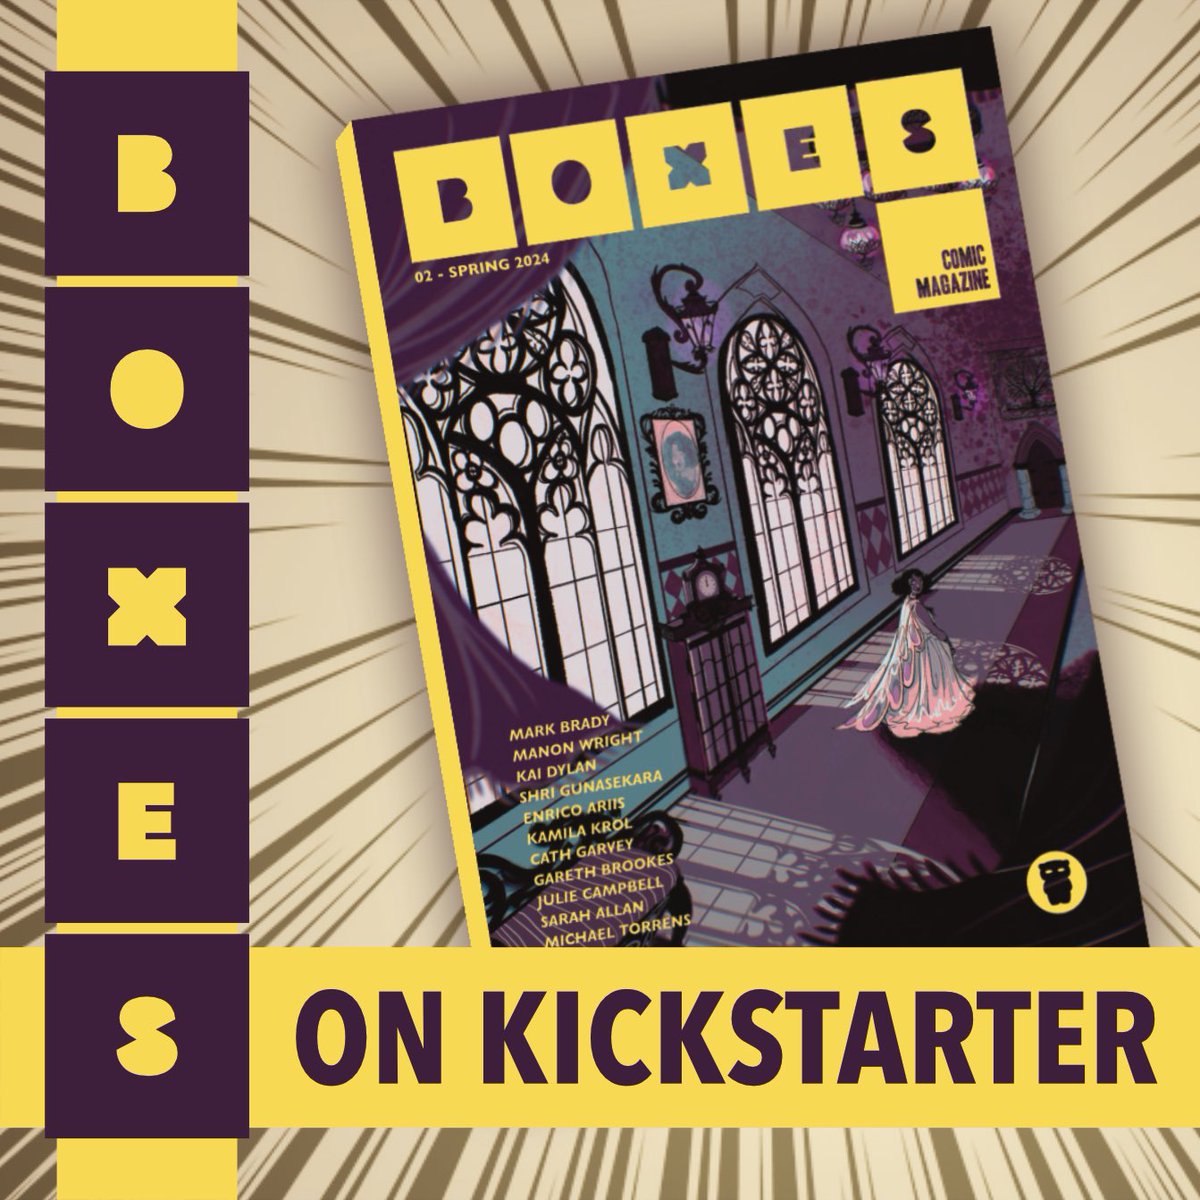 All right! We’re down to the final day of this nail-biter of a campaign! We need about 25-30 backers to help us over the line… are you one of them? Can you help bring this anthology full of beautiful comics to print? Look in here and find out: kickstarter.com/projects/third… 📦📦📦